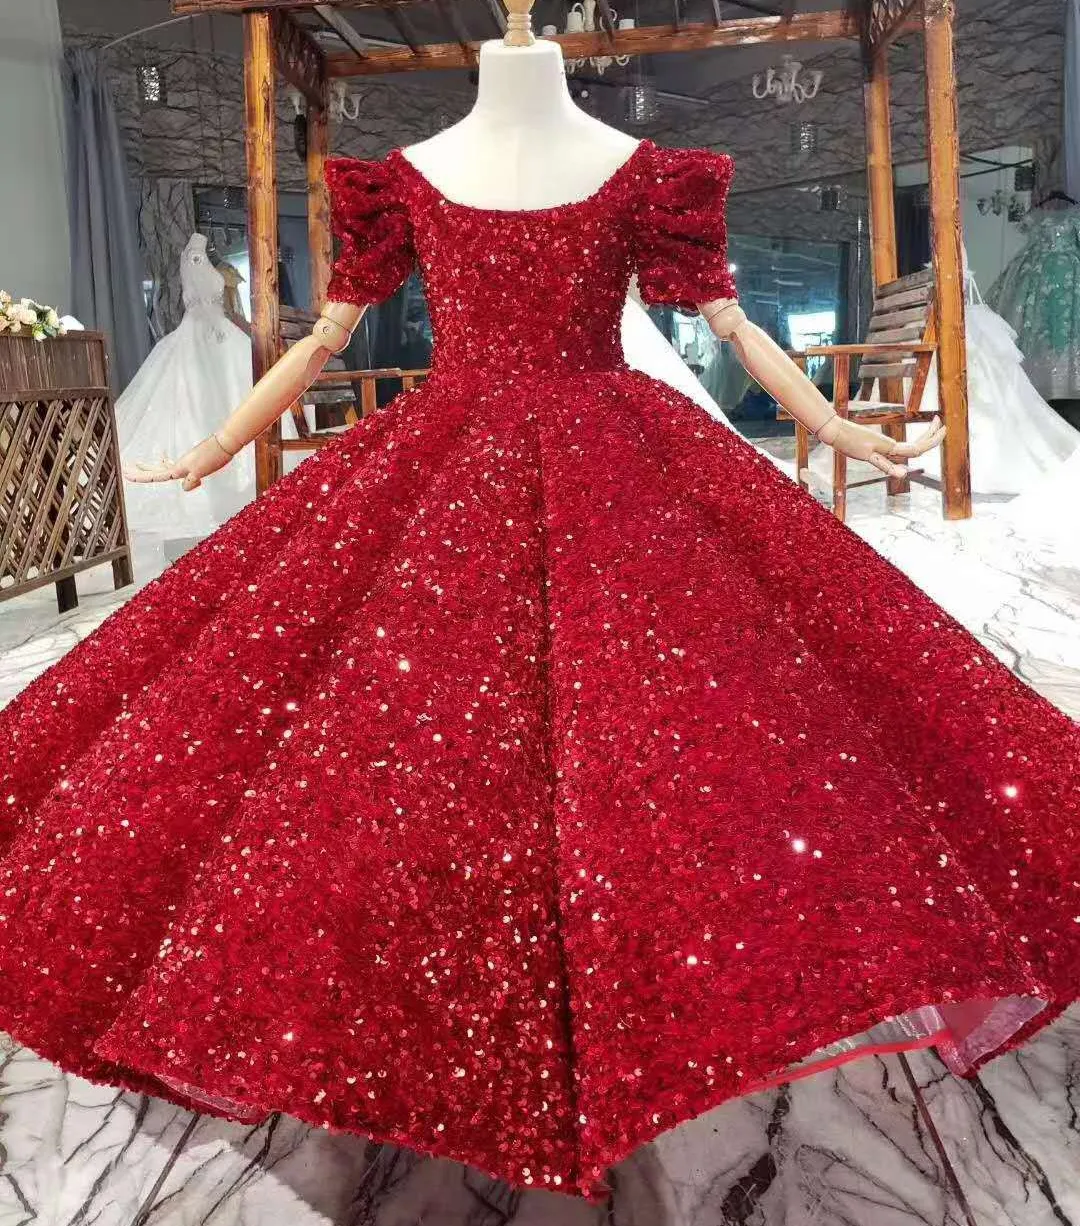 Luxury Silver Red Bling Girls Pageant Dresses Sequin Fluffy Off The Shoulder Ruched Flower Girl Dresses Ball Gowns Party Dresses for Girls